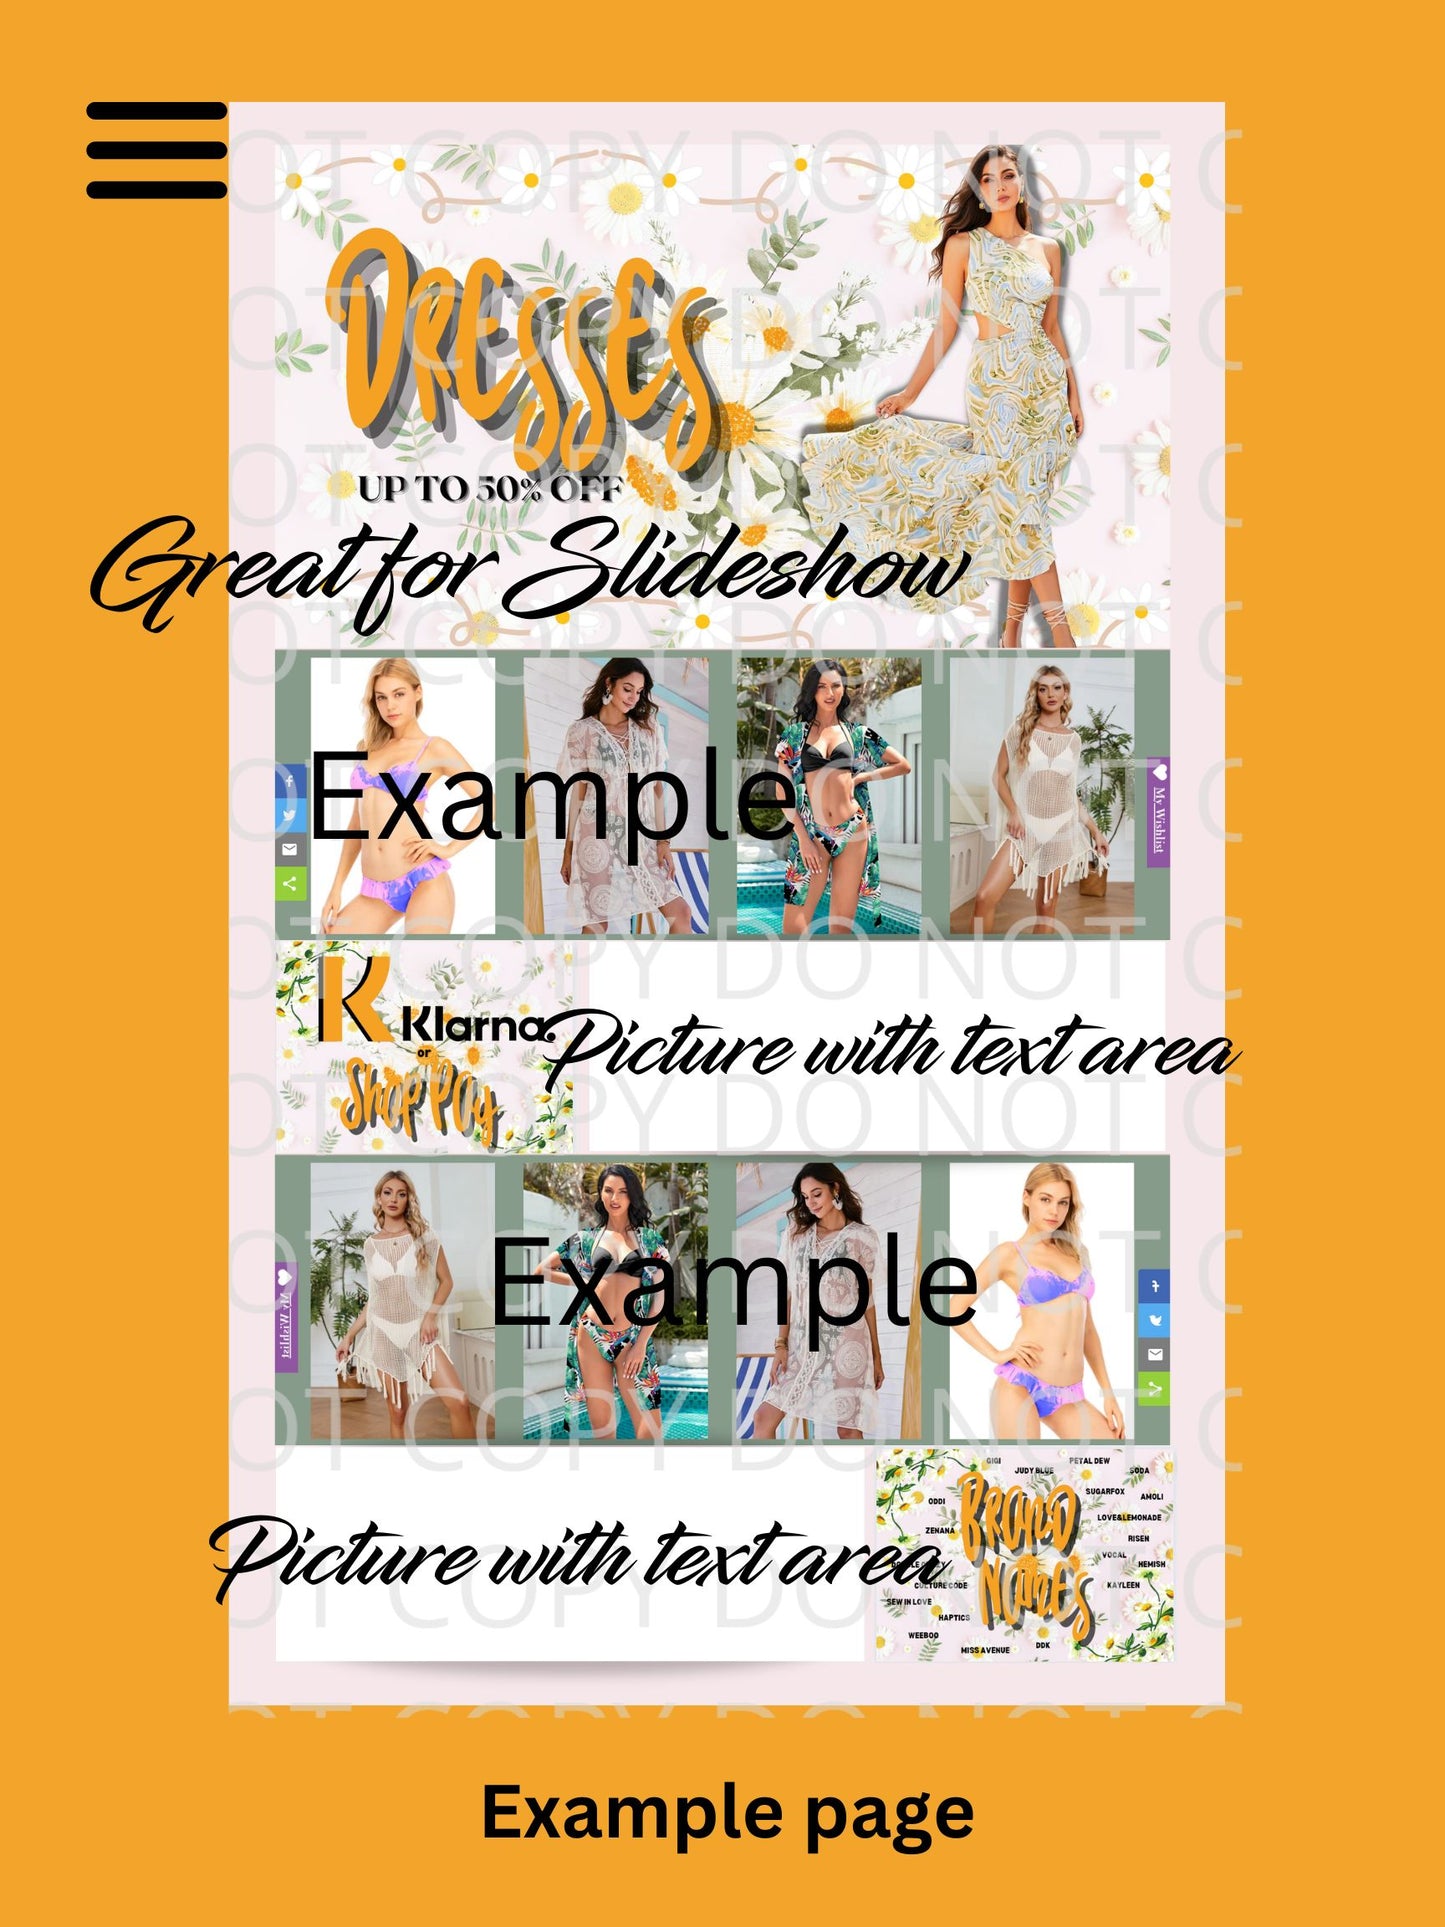 BGShop 37 Digital Daisy Themed Banners & Pics for Blog Posts or Sites | 31 Banners & 6 Pics | JPG PNG MP4